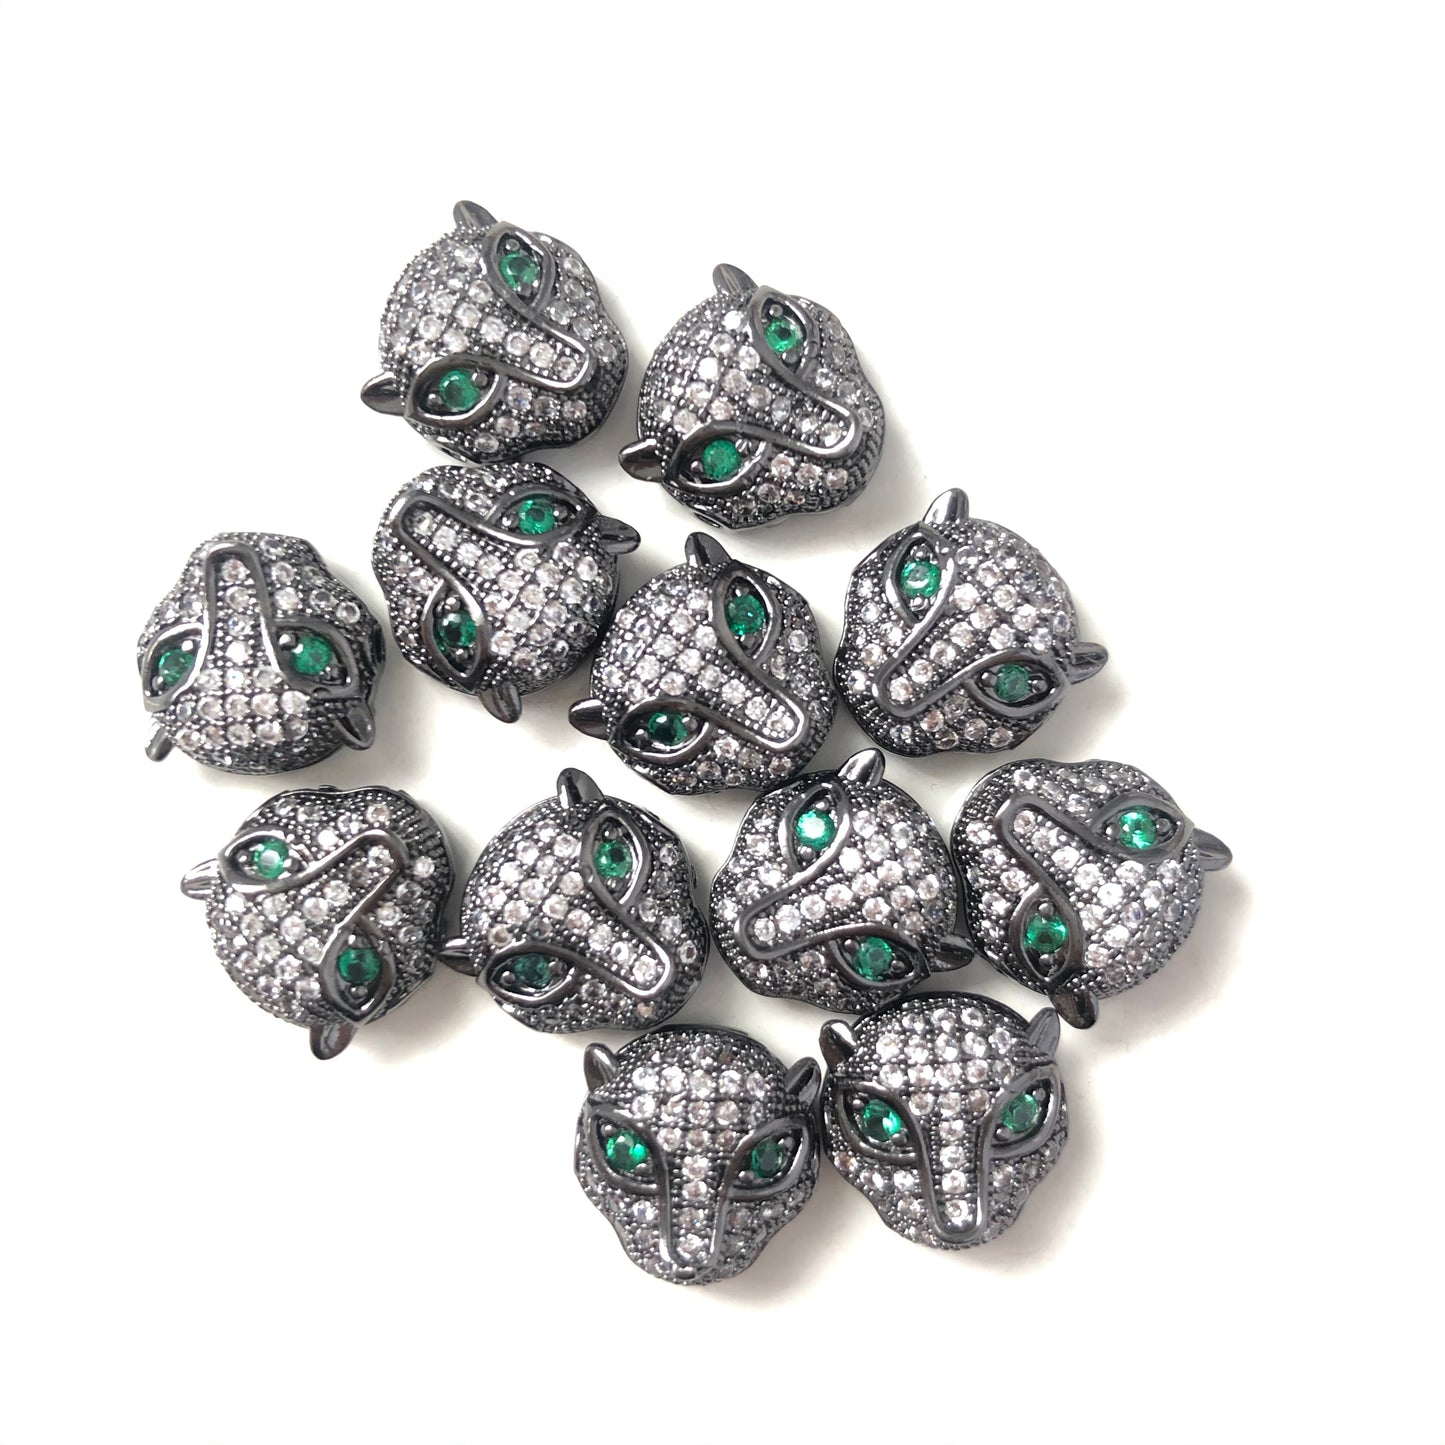 20pcs/lot Clear CZ Paved Panther Head Spacers Black CZ Paved Spacers Animal Spacers Charms Beads Beyond